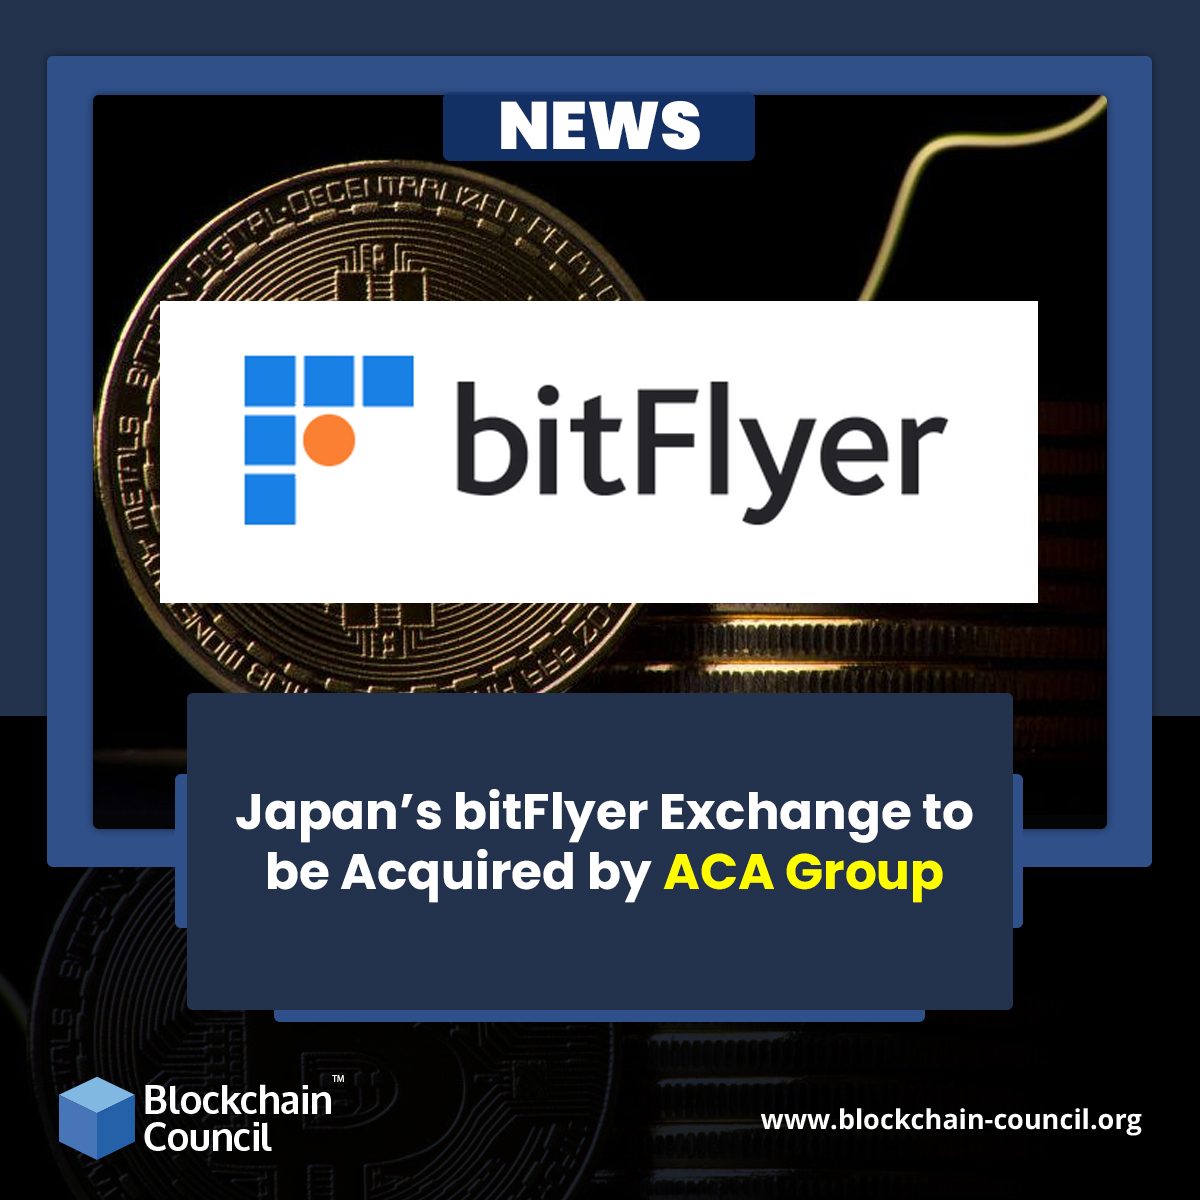 Japan’s bitFlyer Exchange to be Acquired by ACA Group